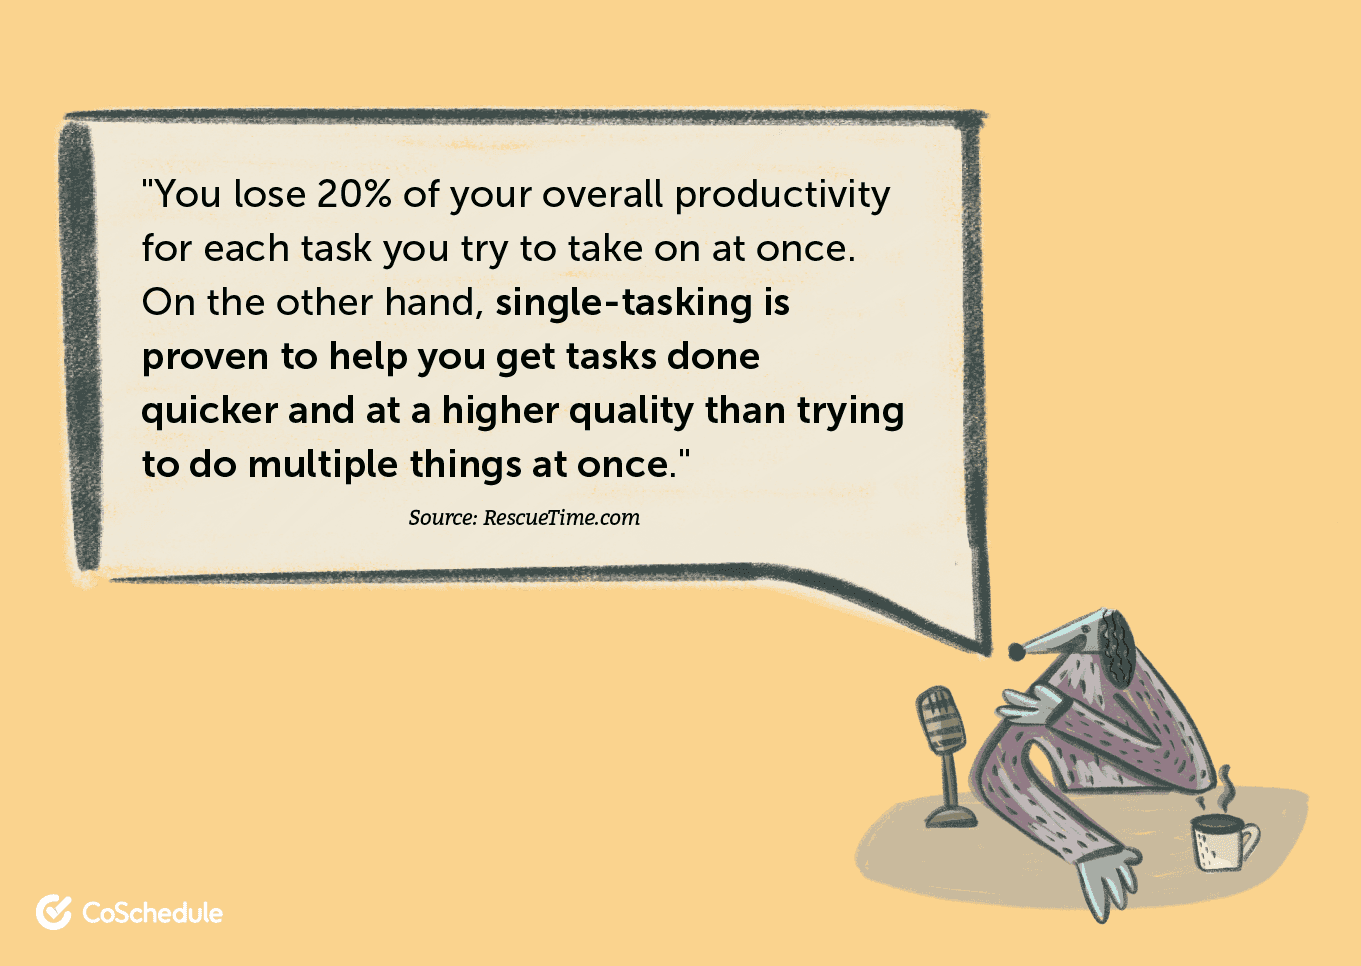 You lose 20% of your productivity for each task you try to take on at once